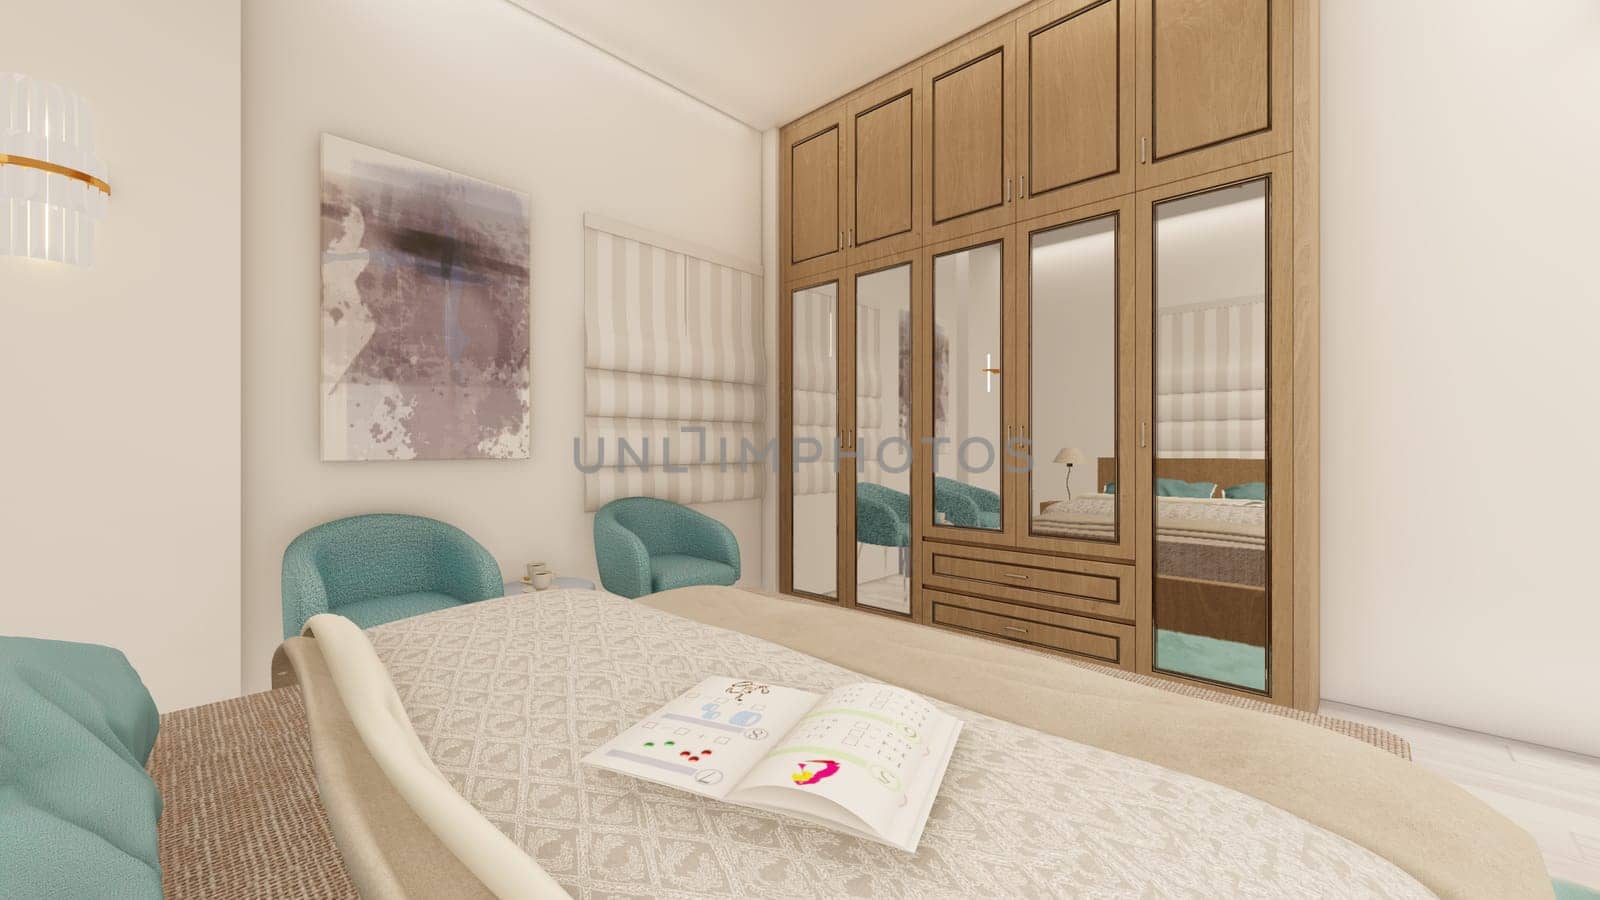 Realistic bedroom with Birchwood furniture 3d rendering by shawlinmohd